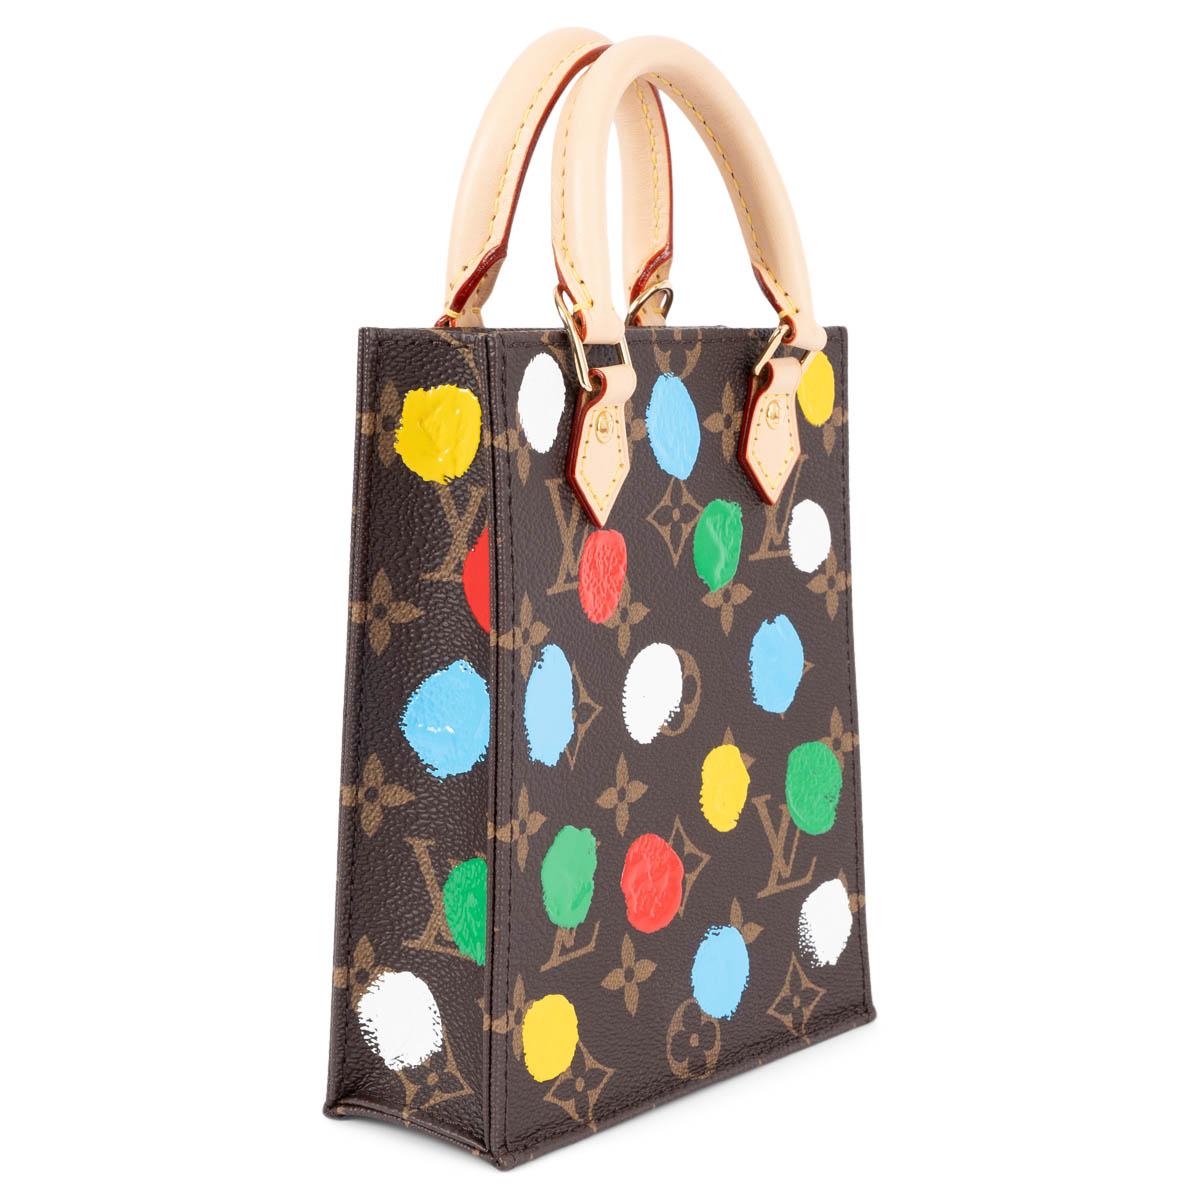 100% authentic Louis Vuitton x Yayoi Kusama Petit Sac Plat mini tote in Ebene Monogram canvas with multicolor 3D painted dots. Features natural cowhide-leather trim, gold-plated hardware and removable and adjustable shoulder strap. Lined in red